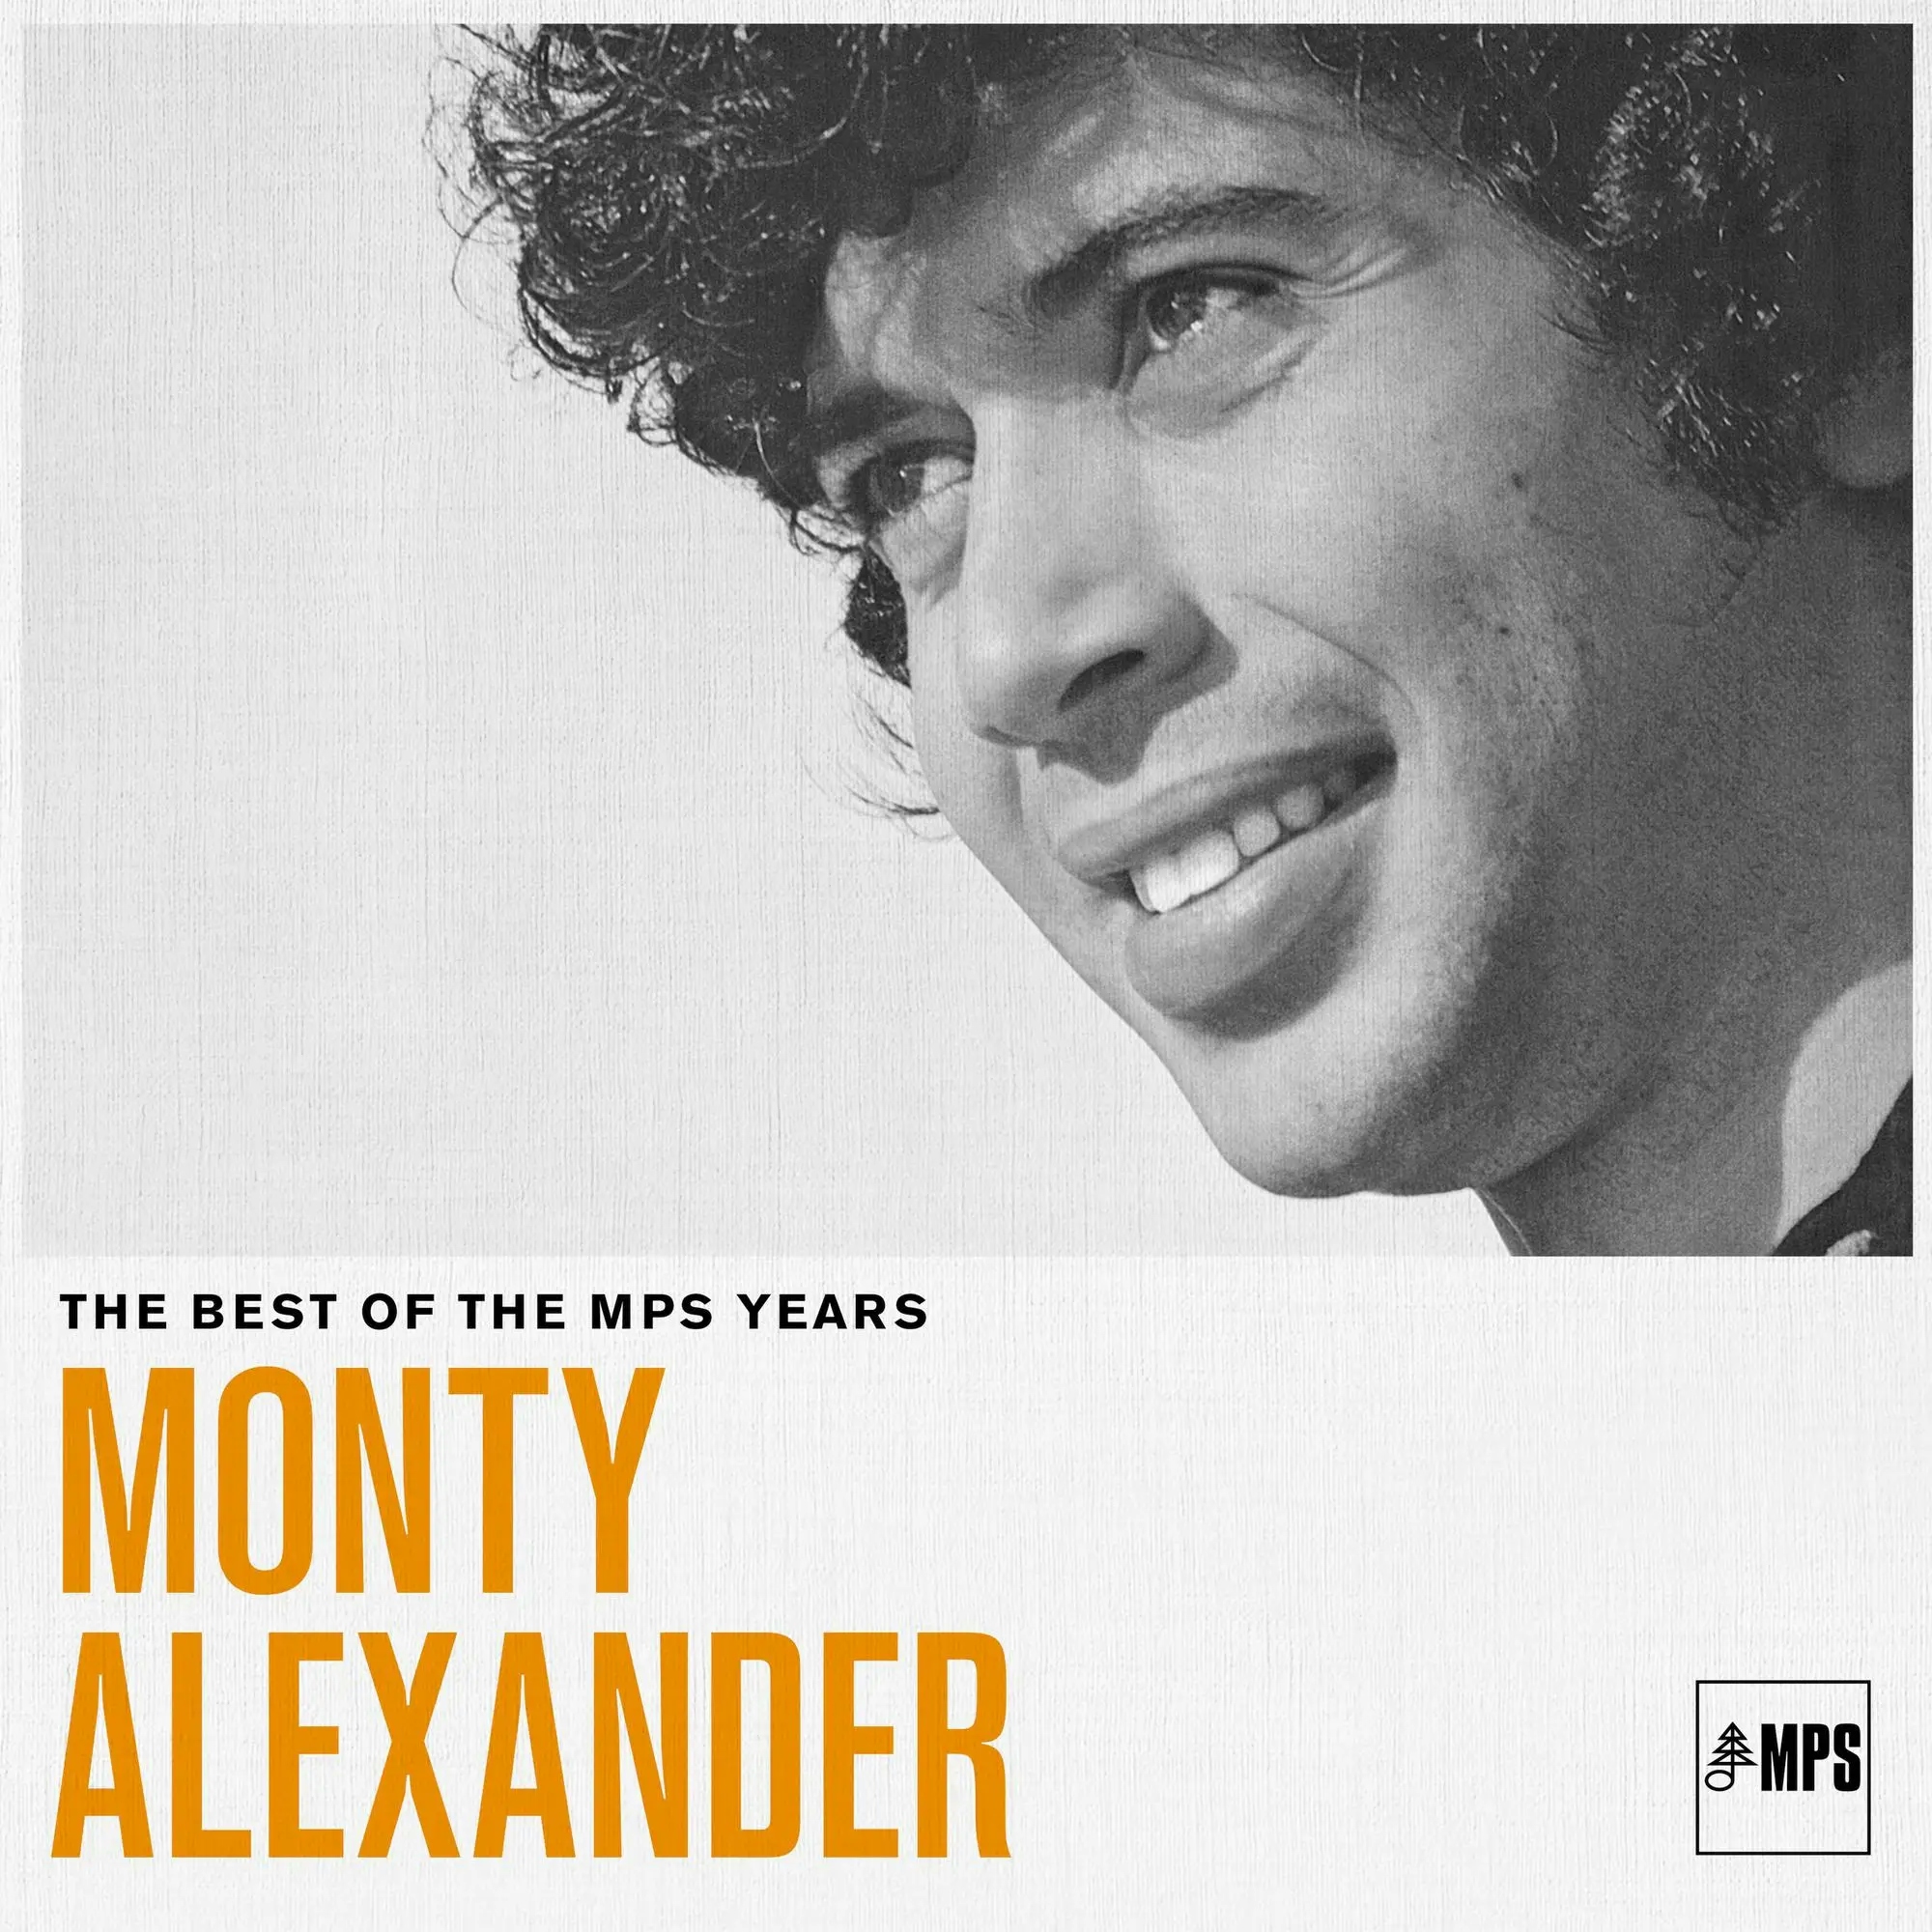 Album artwork for The Best Of Mps Years by Monty Alexander